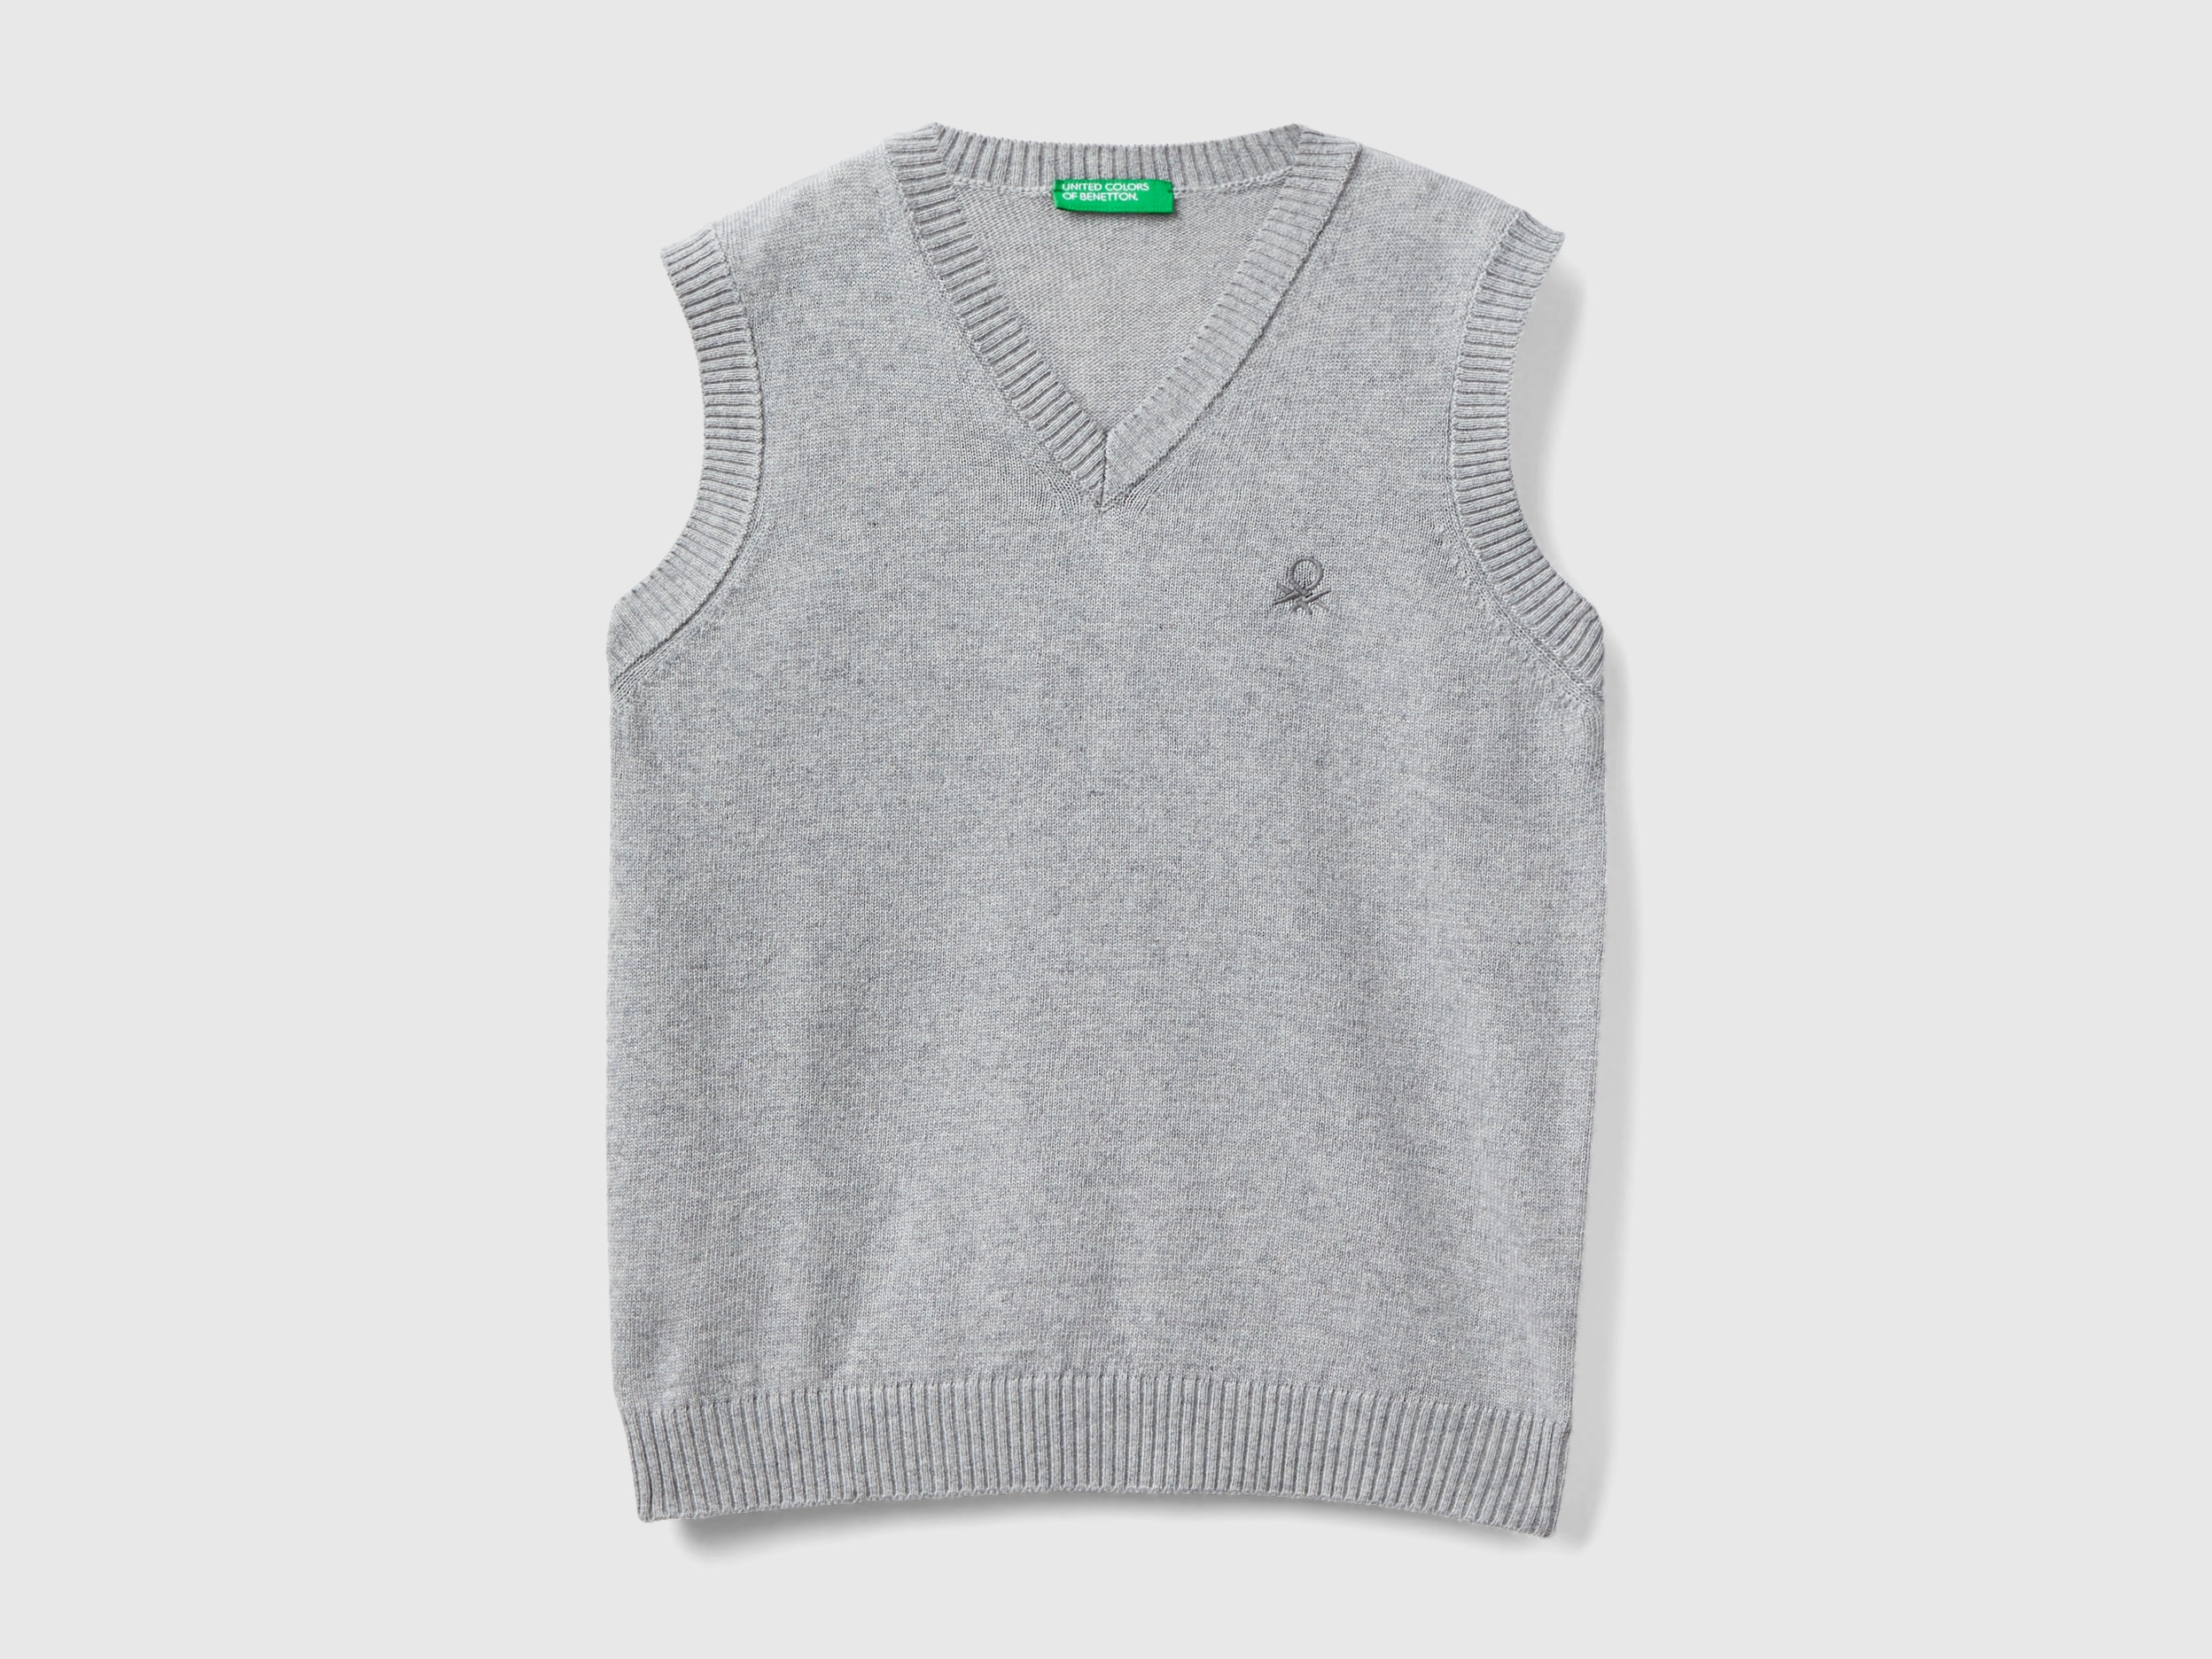 Benetton, Vest In Cashmere And Wool Blend, size 2XL, Light Gray, Kids